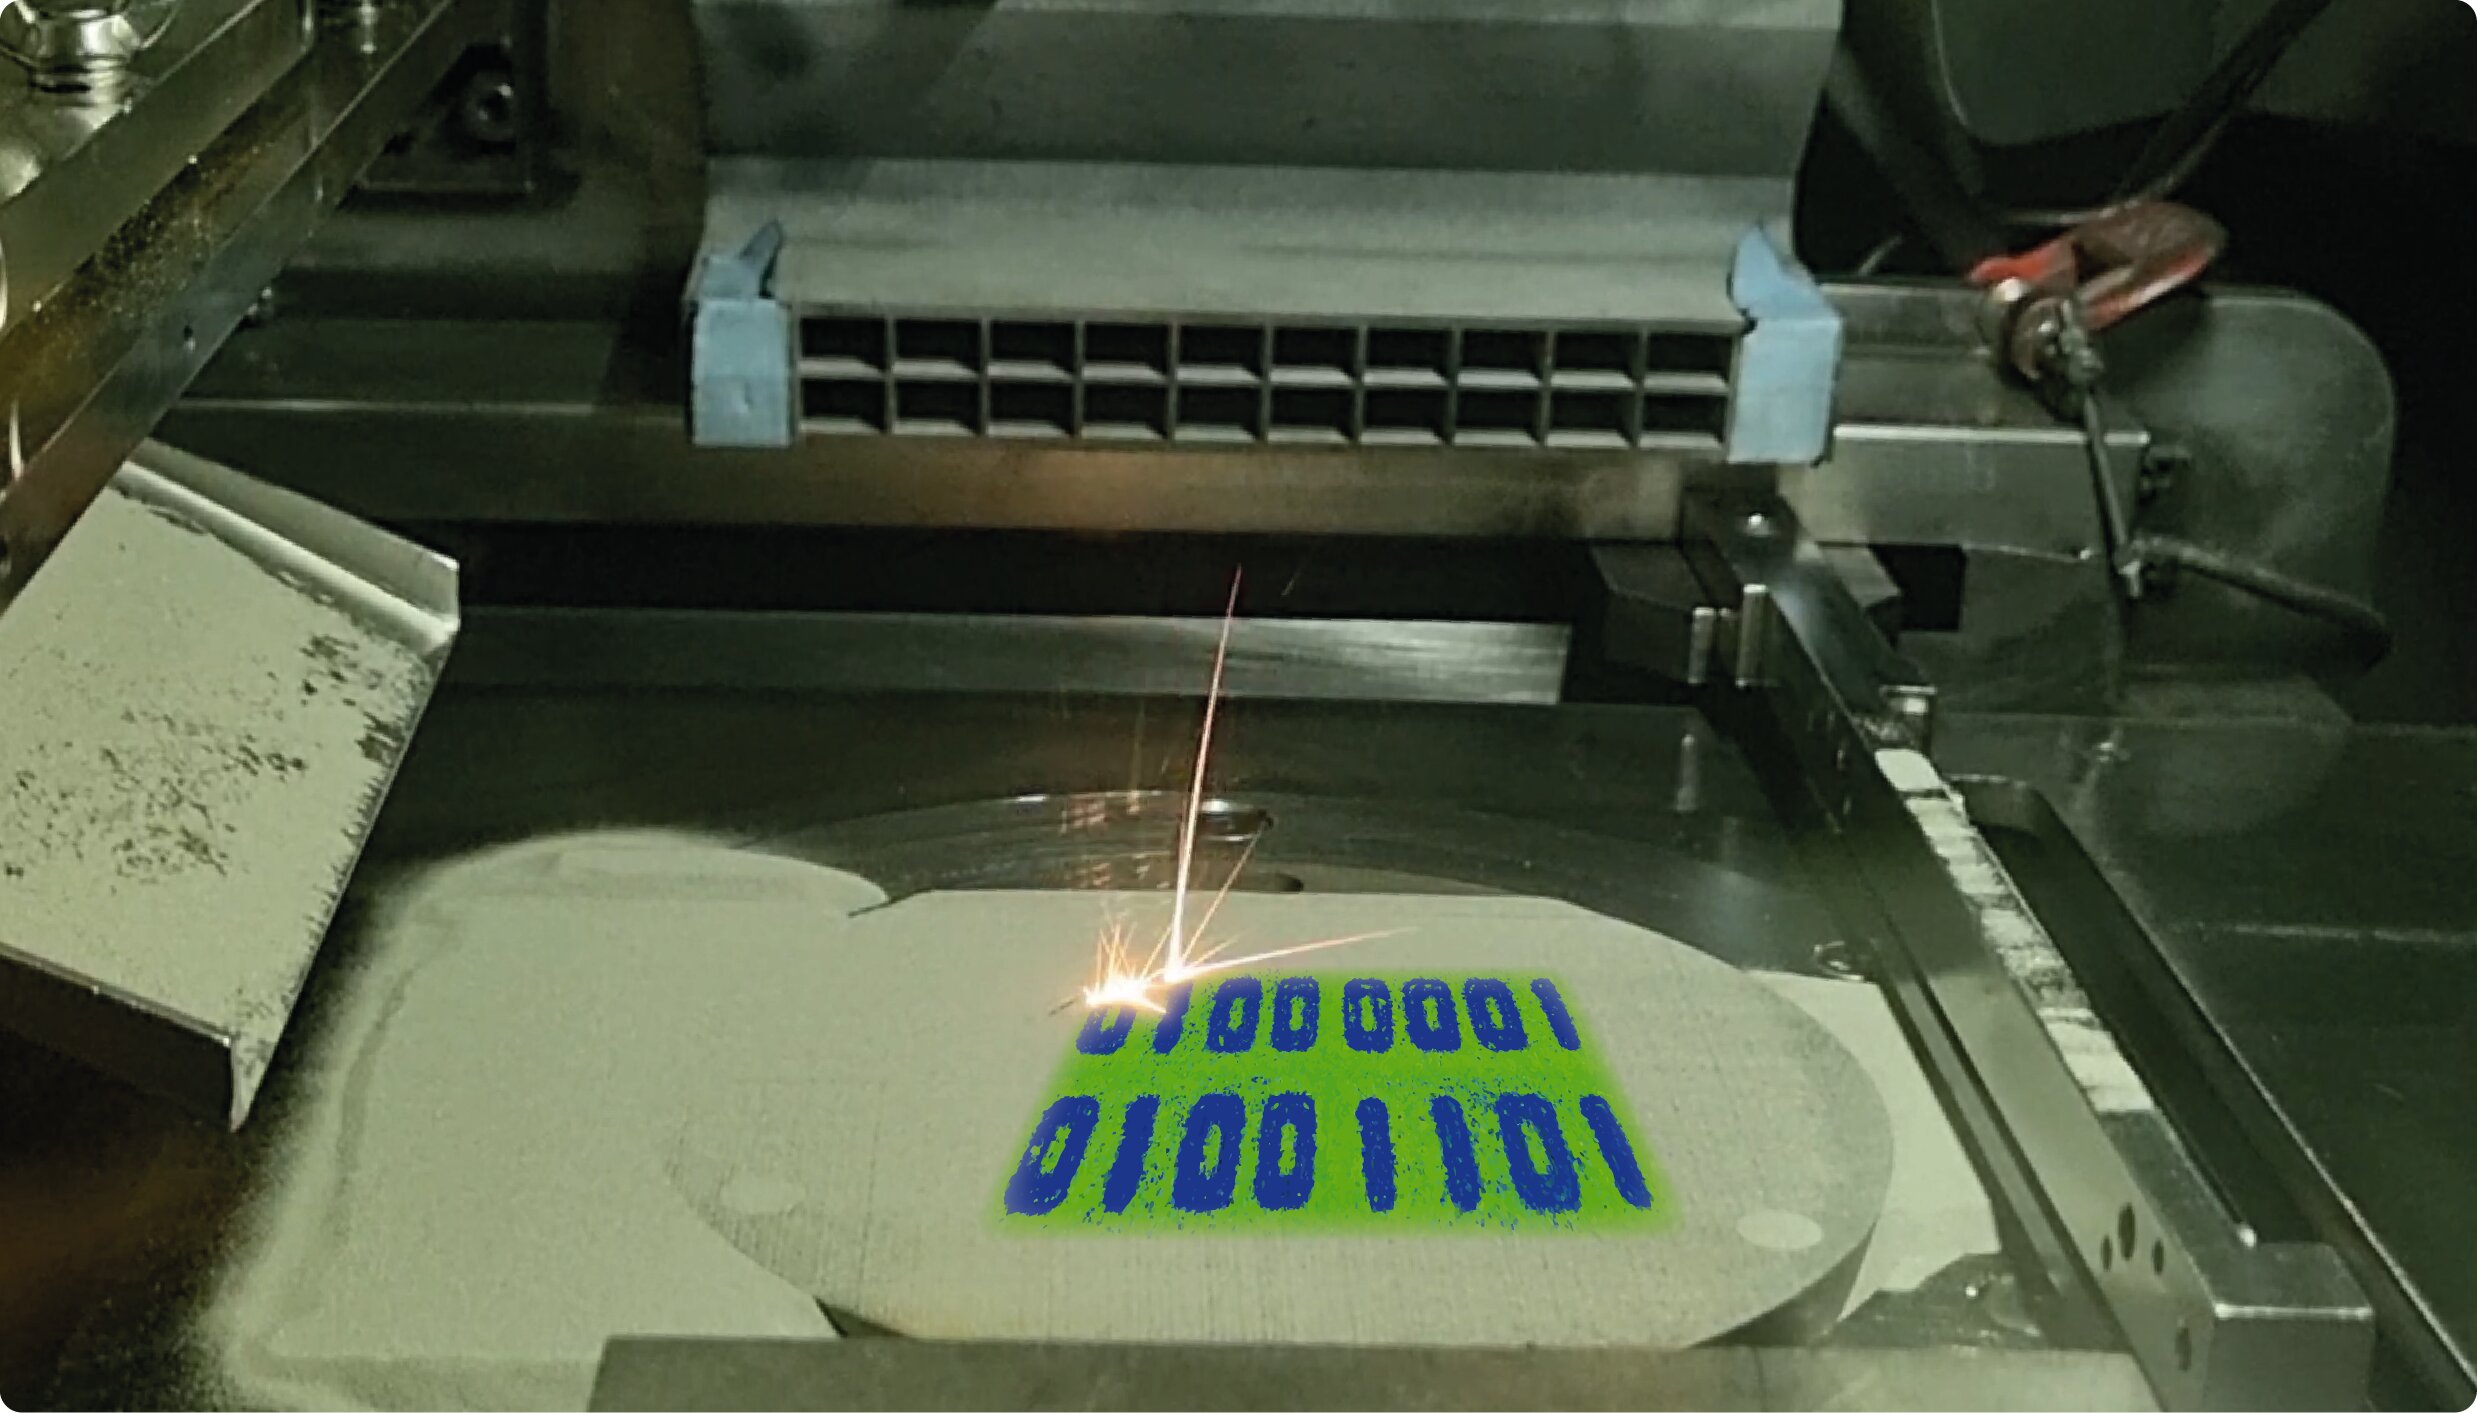 using-lasers-to-heat-and-beat-3d-printed-steel-could-help-reduce-costs